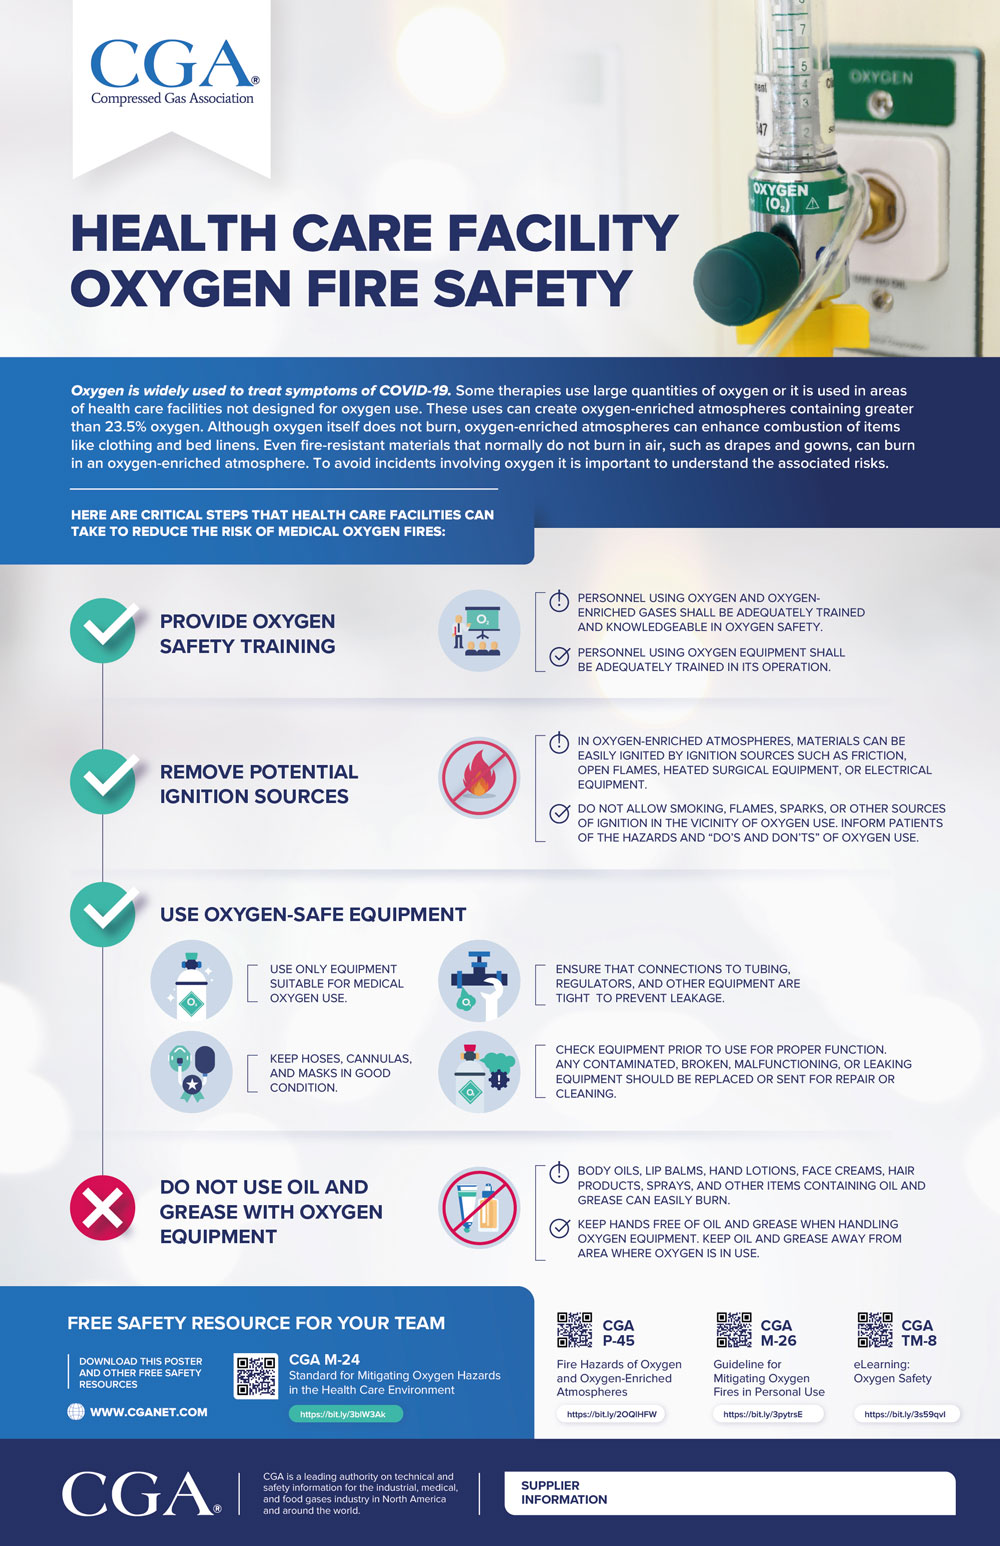 https://www.cganet.com/wp-content/uploads/Health-Care-Oxygen-Safety_1000X1546.jpg